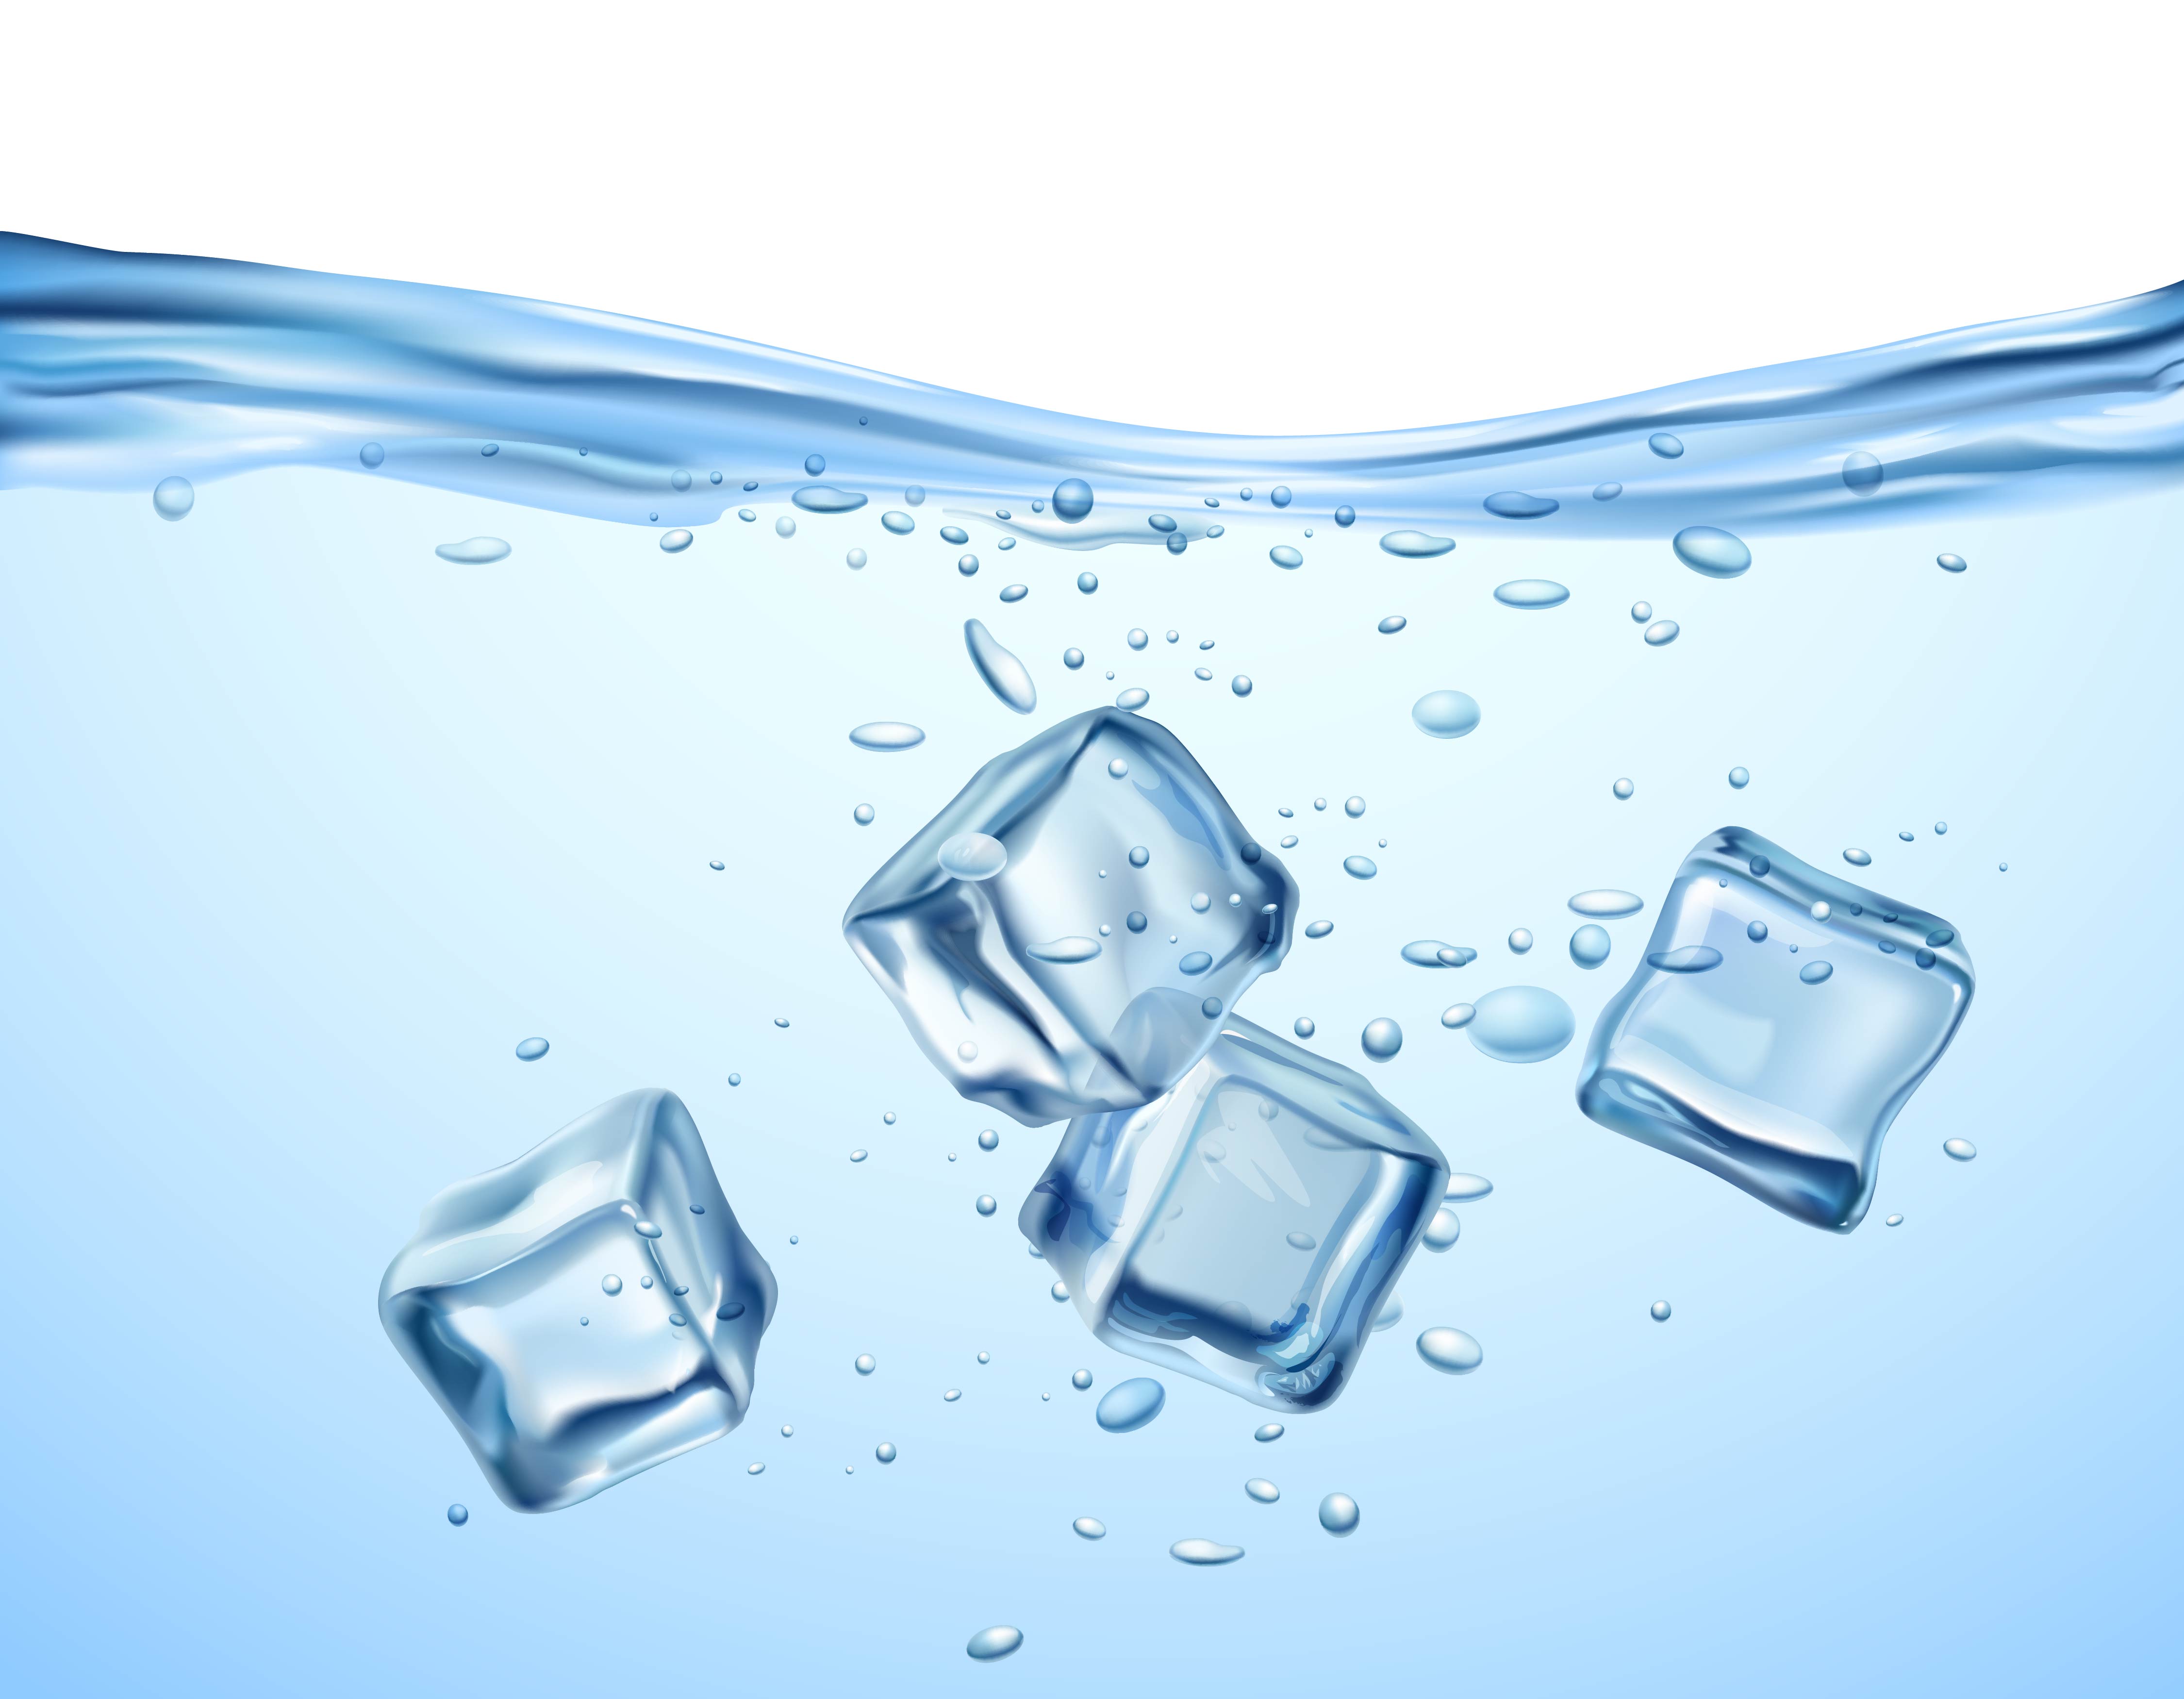 Ice Cubes In Water 467779 Download Free Vectors, Clipart